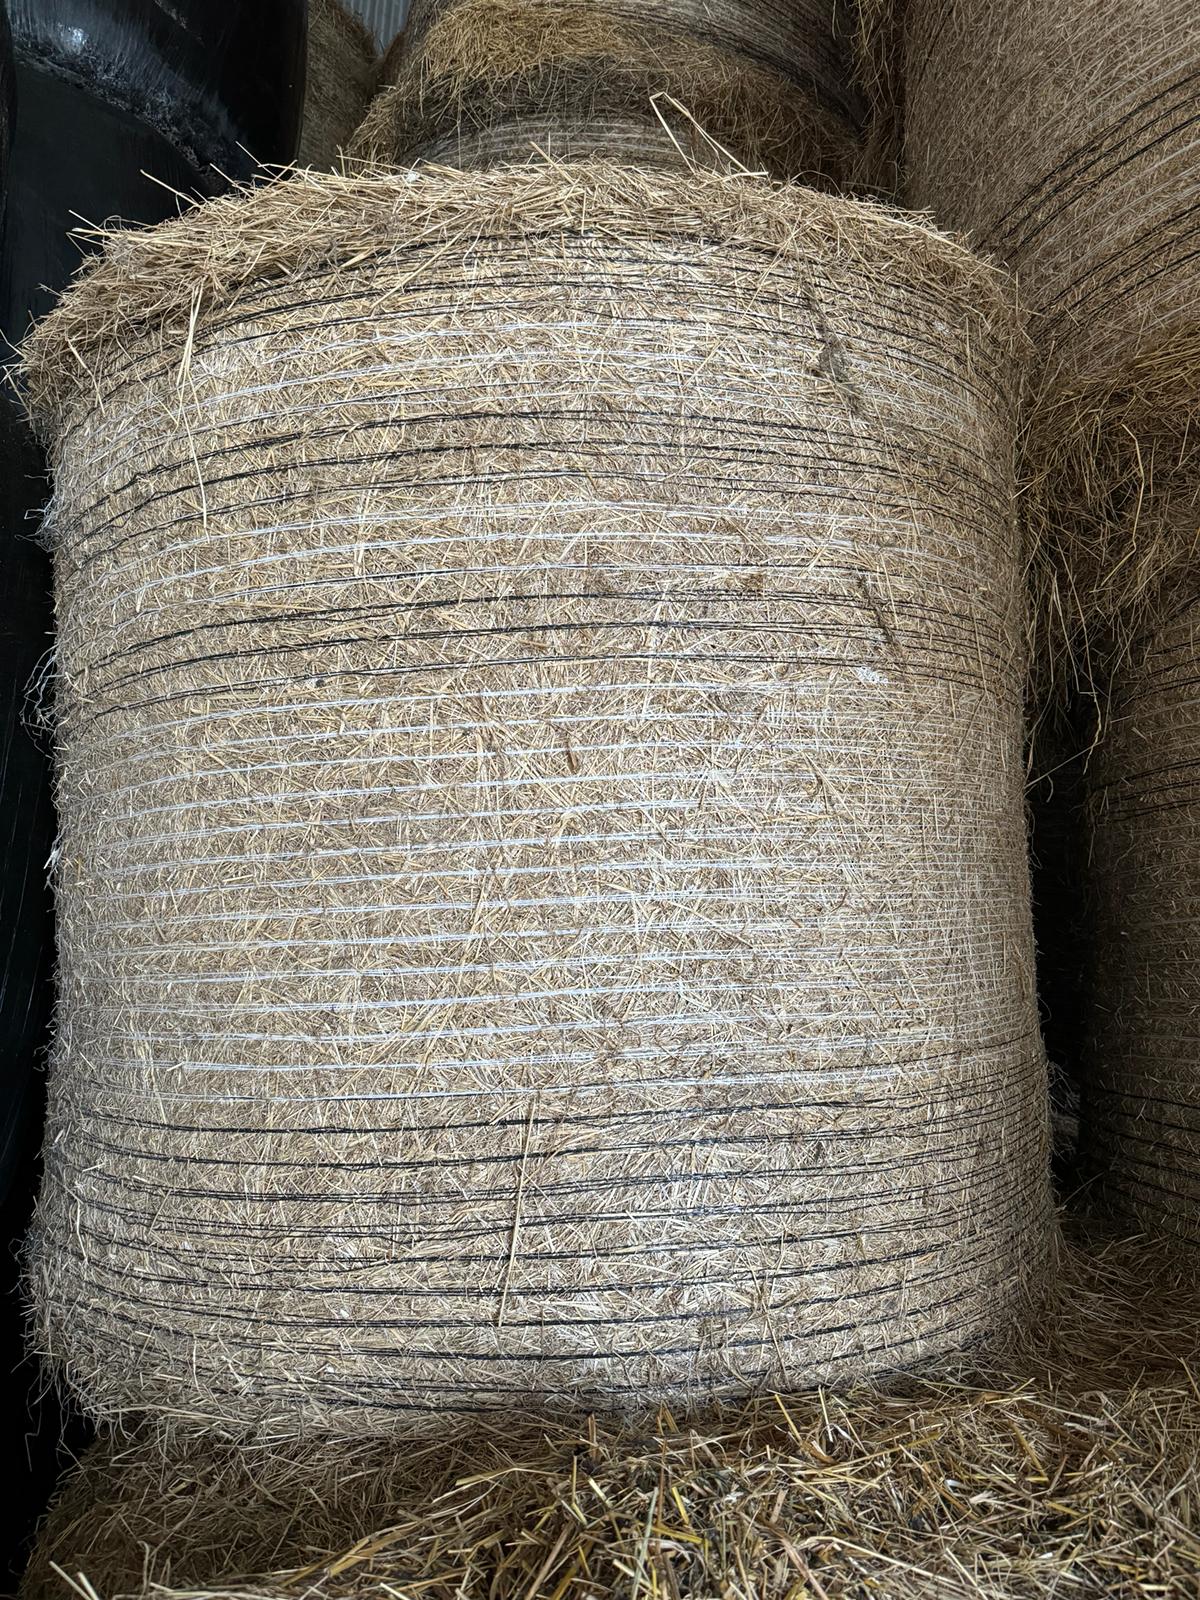 Certified Organic Hay made in 2023